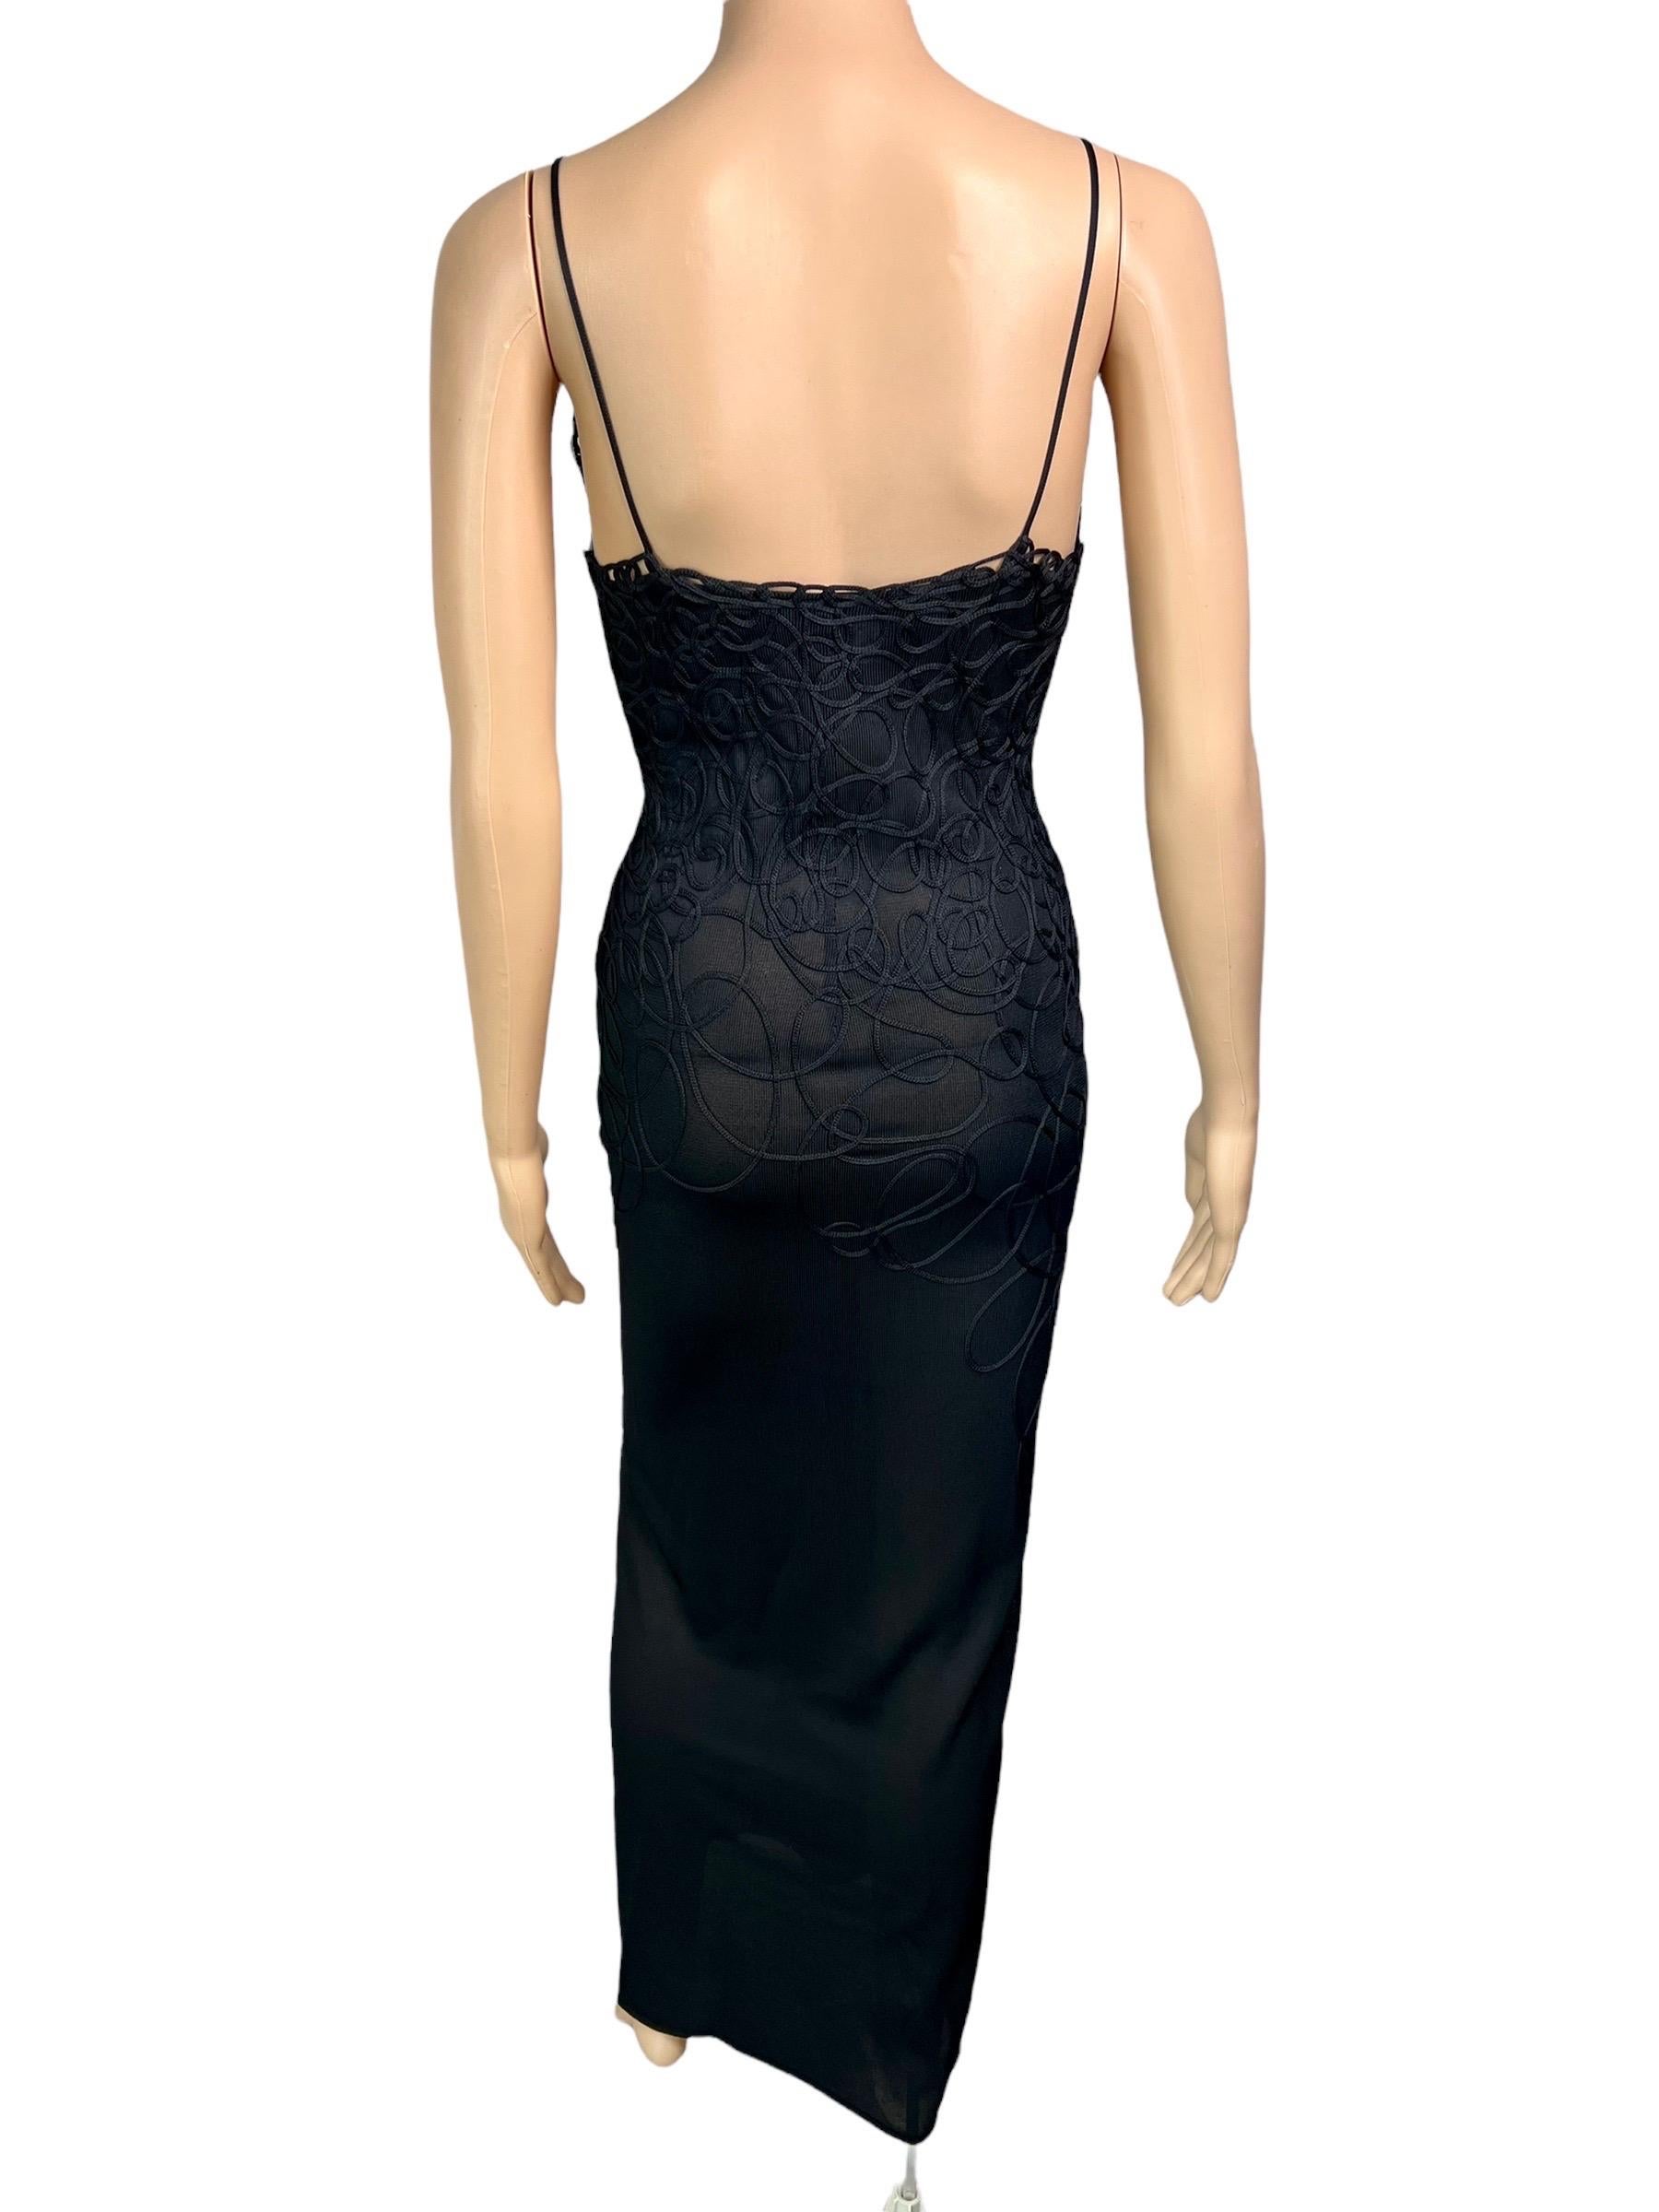 Thierry Mugler Vintage Embroidered Semi-Sheer Knit Bodycon Black Maxi Dress  7